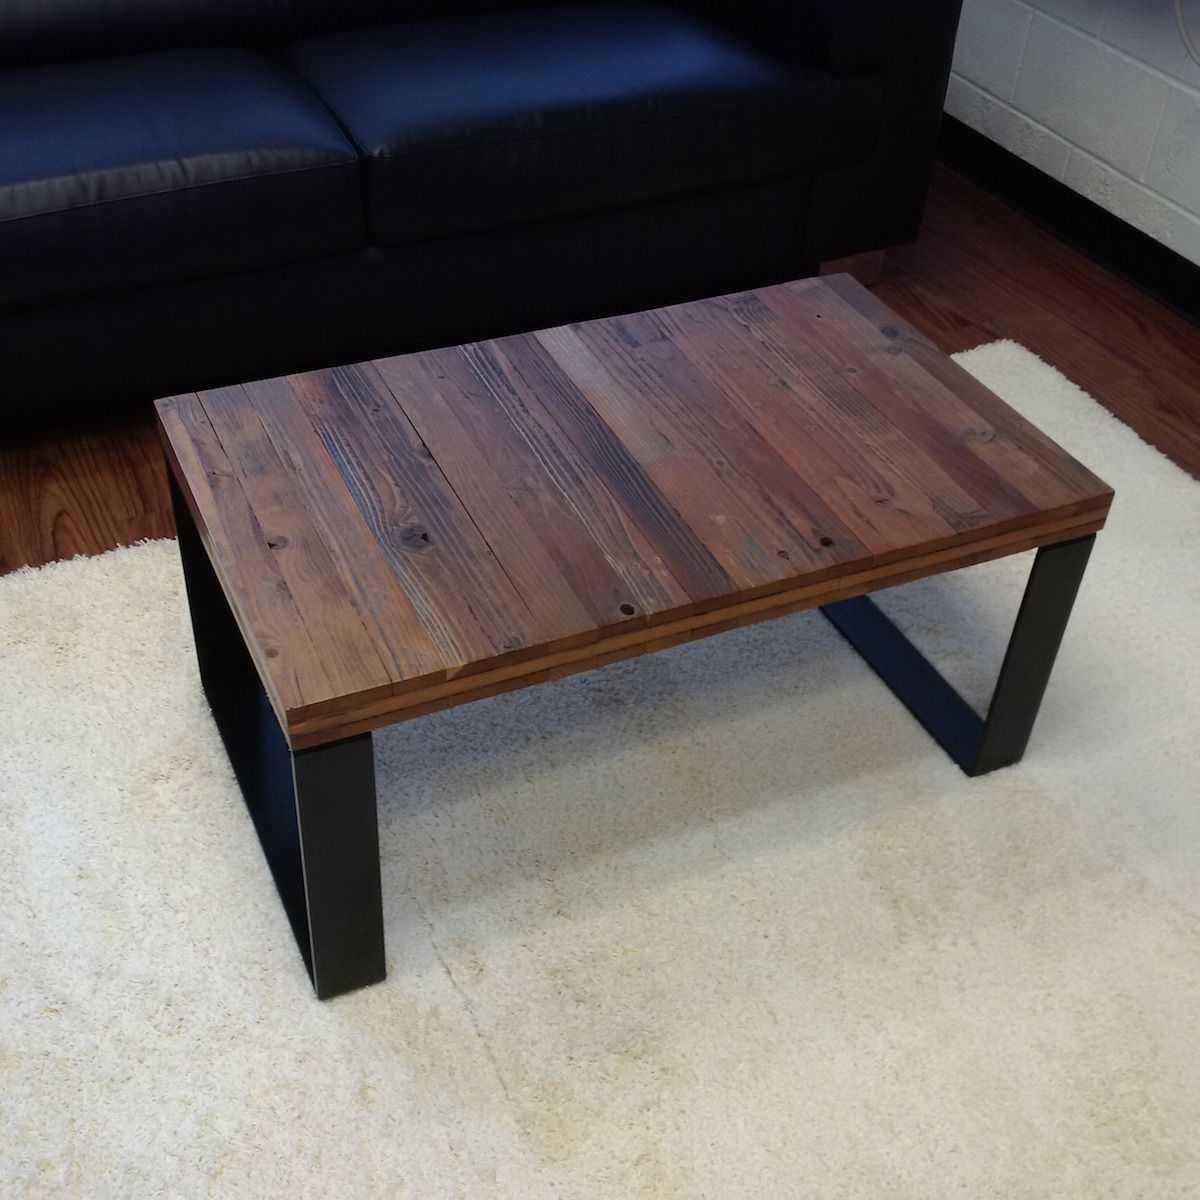 Buy Custom Reclaimed Barn Wood Coffee Table, Made To Order From Sweet Pertaining To Coffee Tables With Storage And Barn Doors (Gallery 15 of 20)